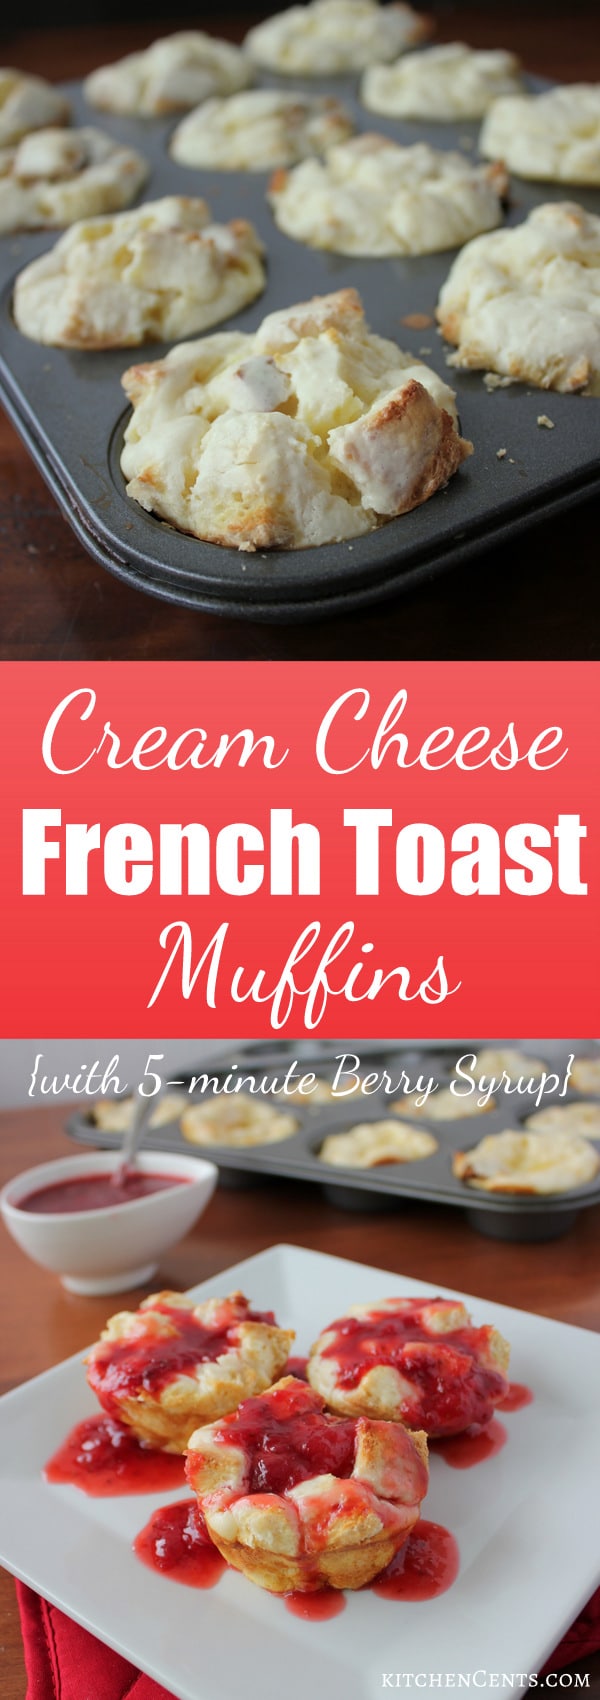 Cream Cheese French Toast Muffins | KitchenCents.com